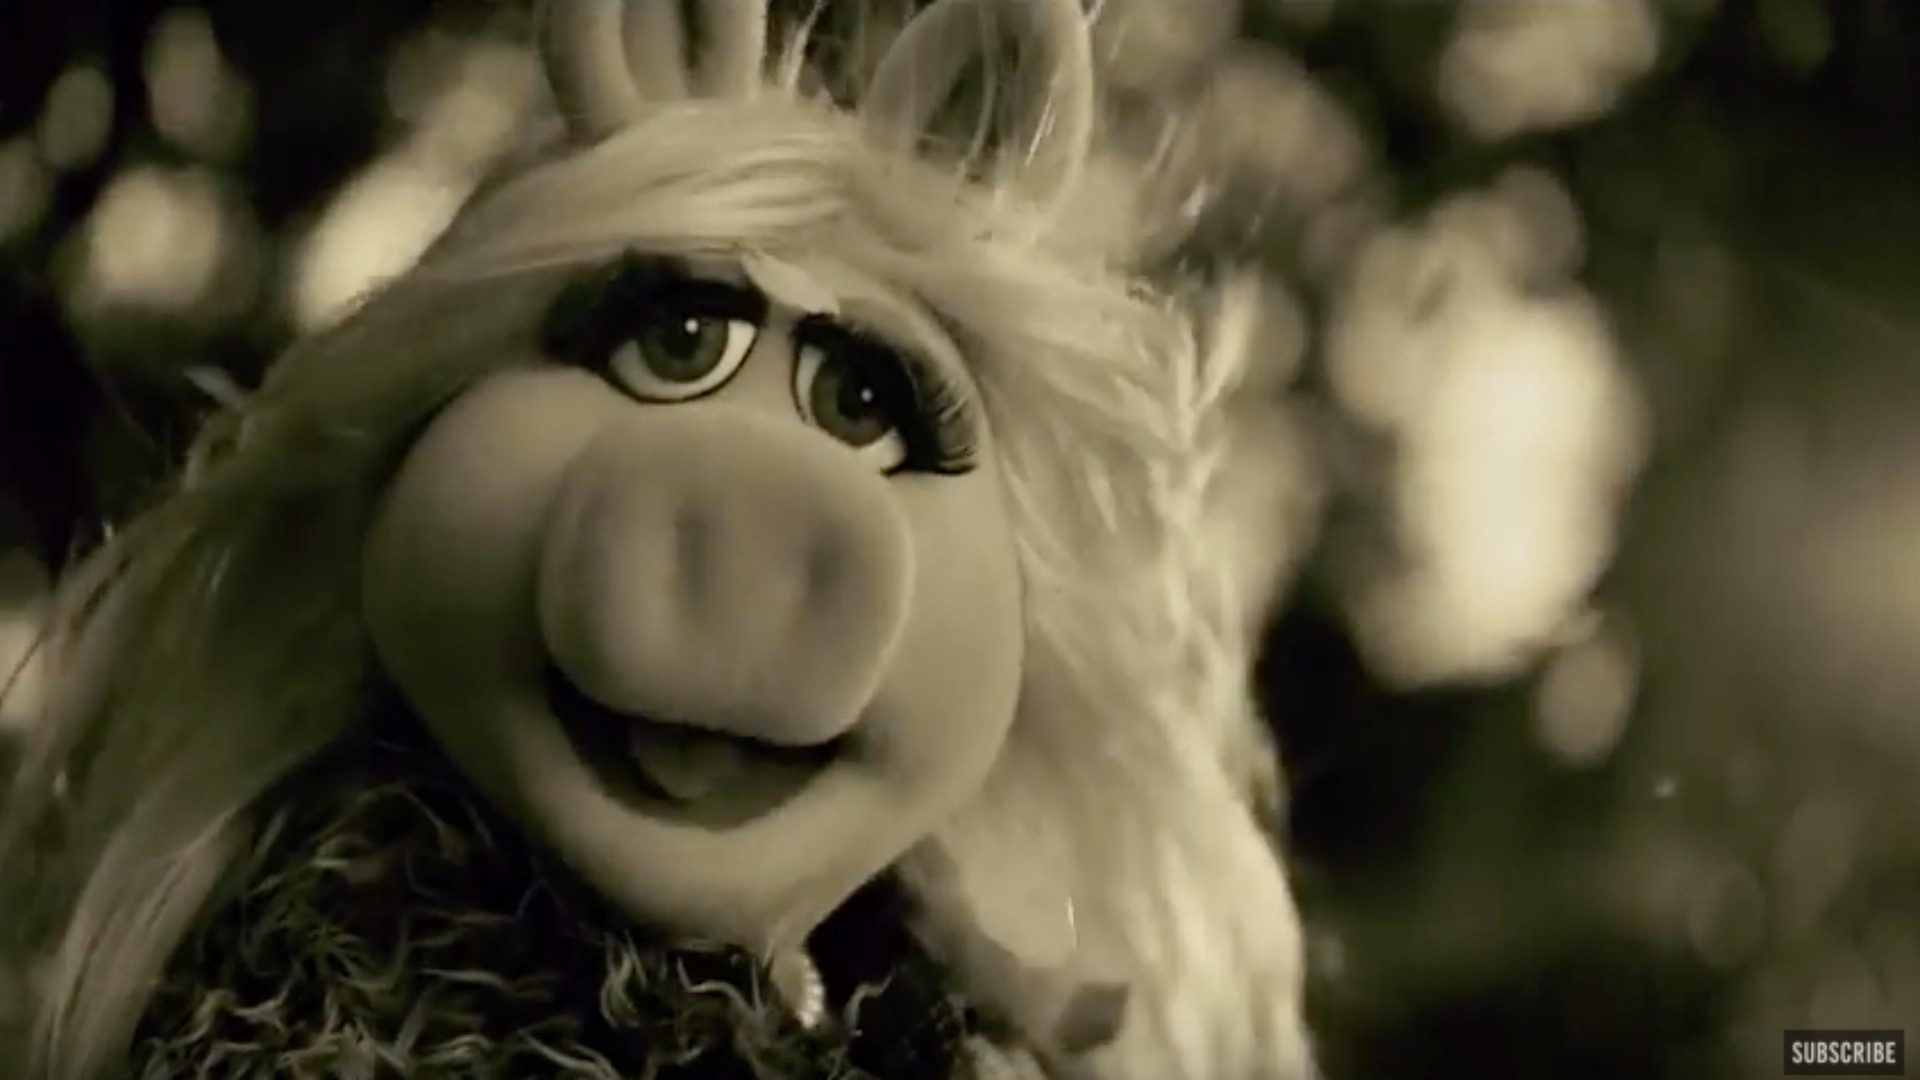 1920x1080 Will Miss Piggy's rendition of 'Hello' be enough to win Kermie back?